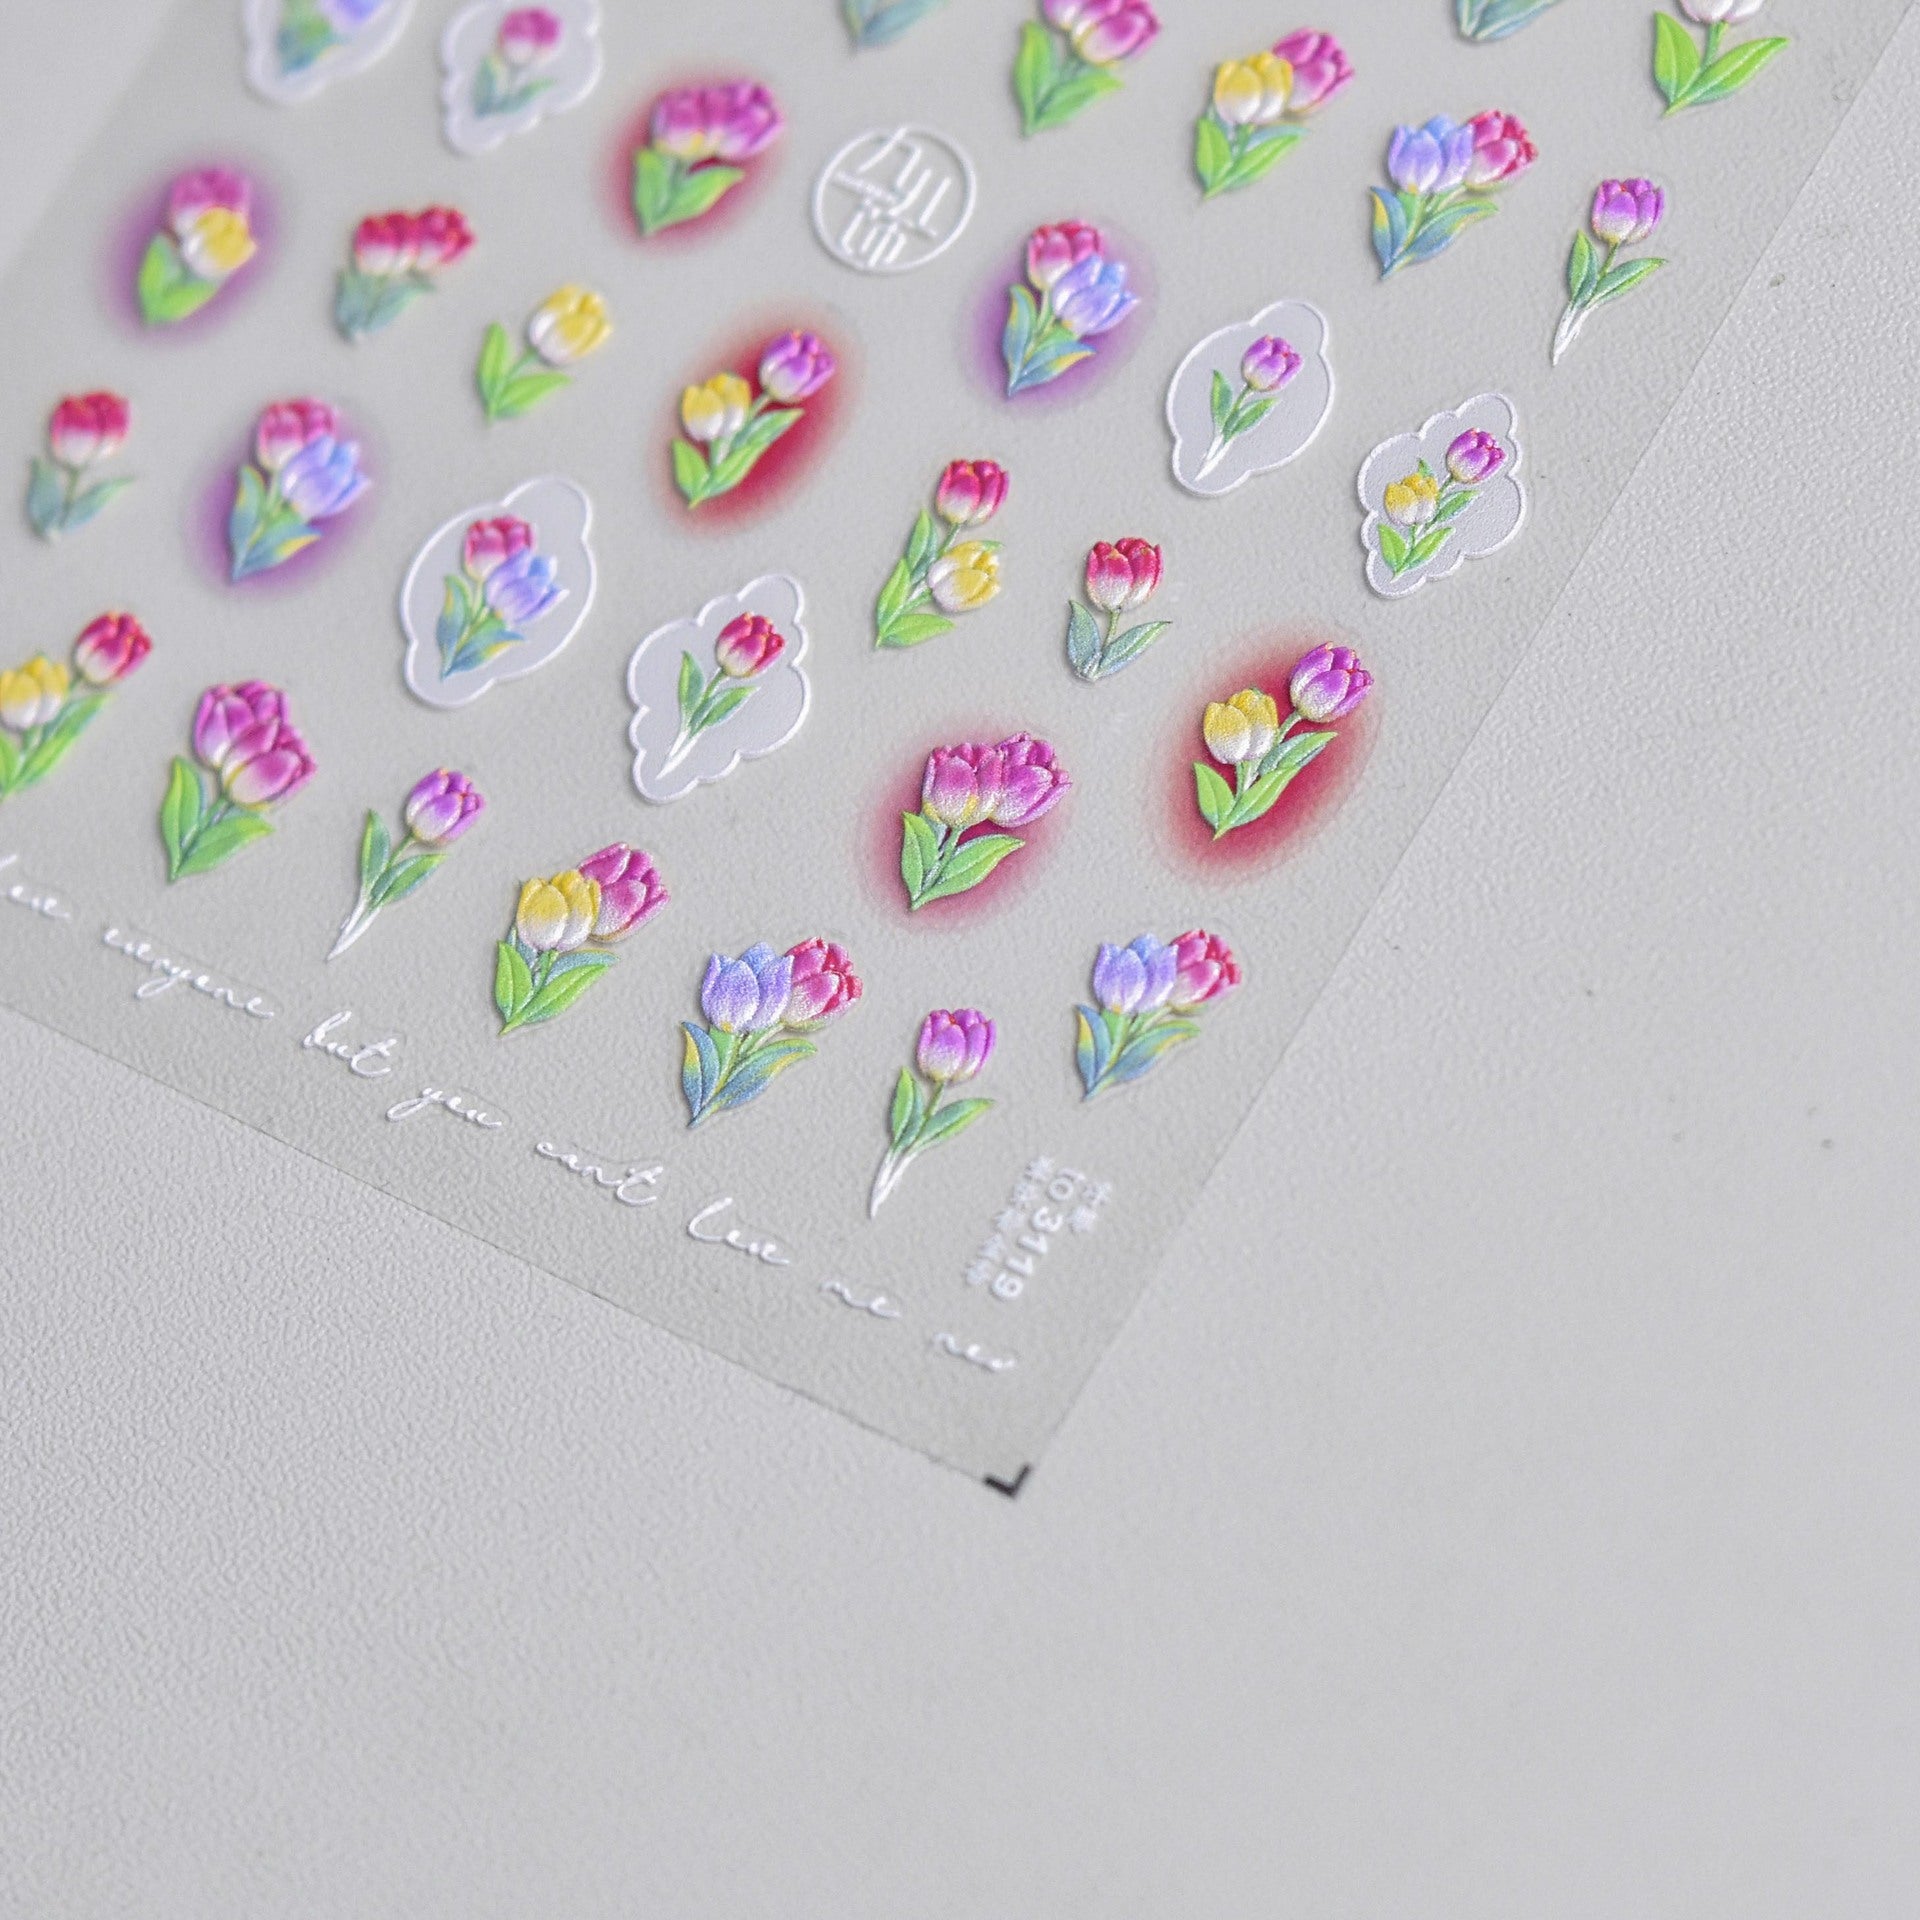 NailMAD Gradient Tulip Nail Art Stickers Adhesive Embossed Daisy Flower Sticker Decals to3097